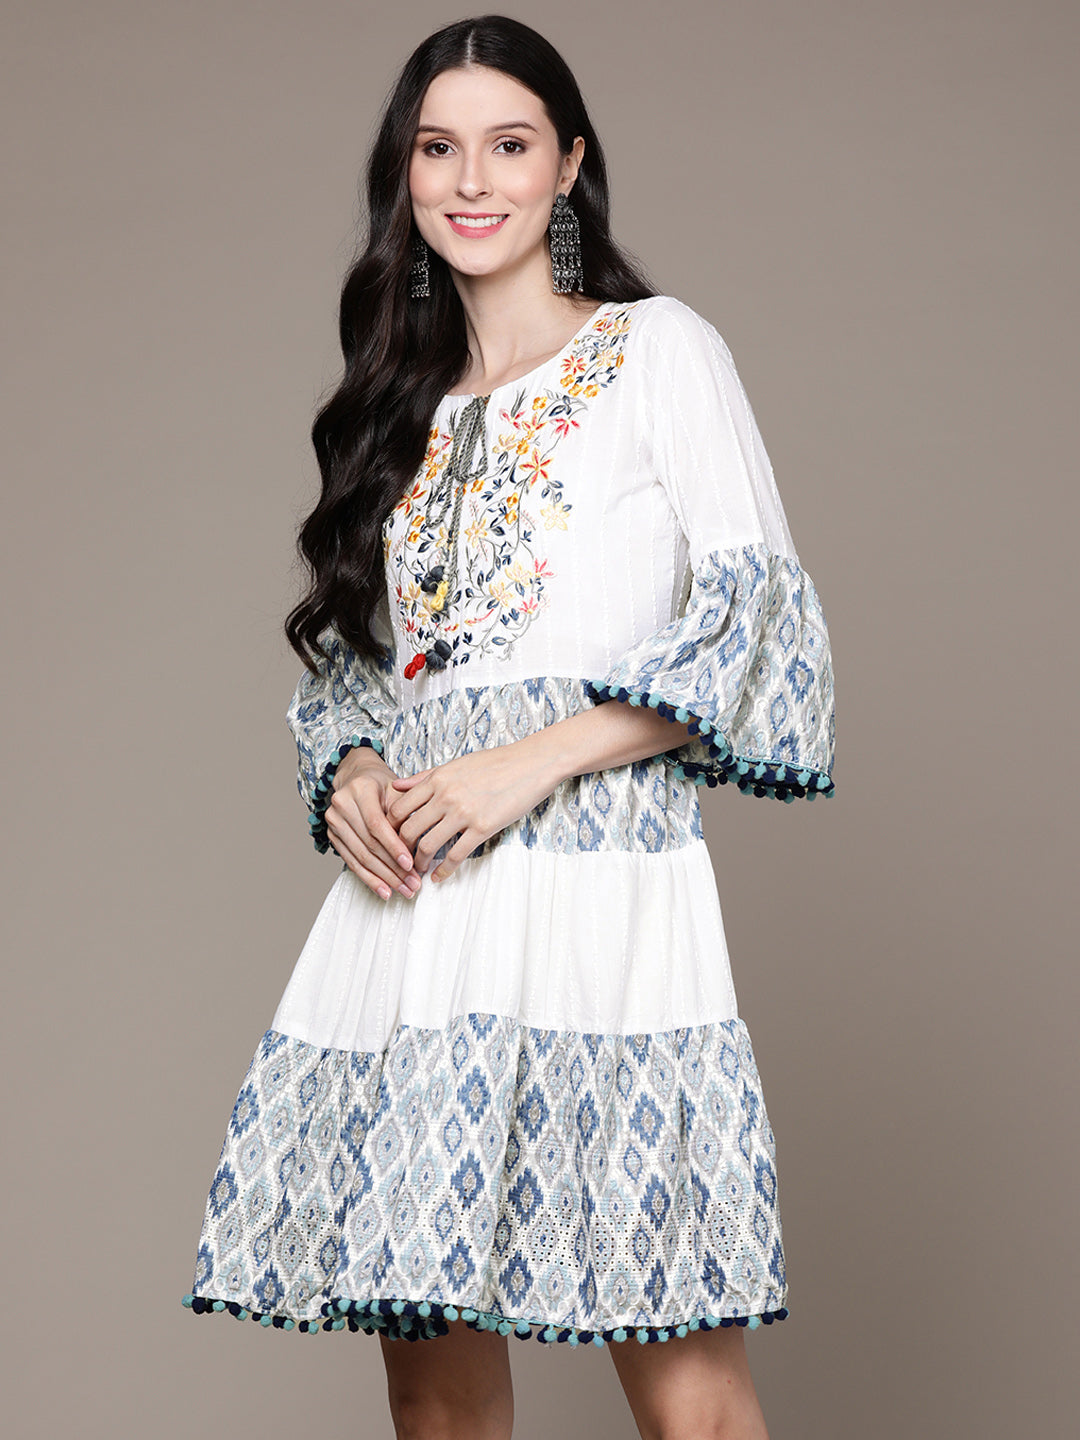 Ishin Women's White & Blue Embroidered A-Line Dress